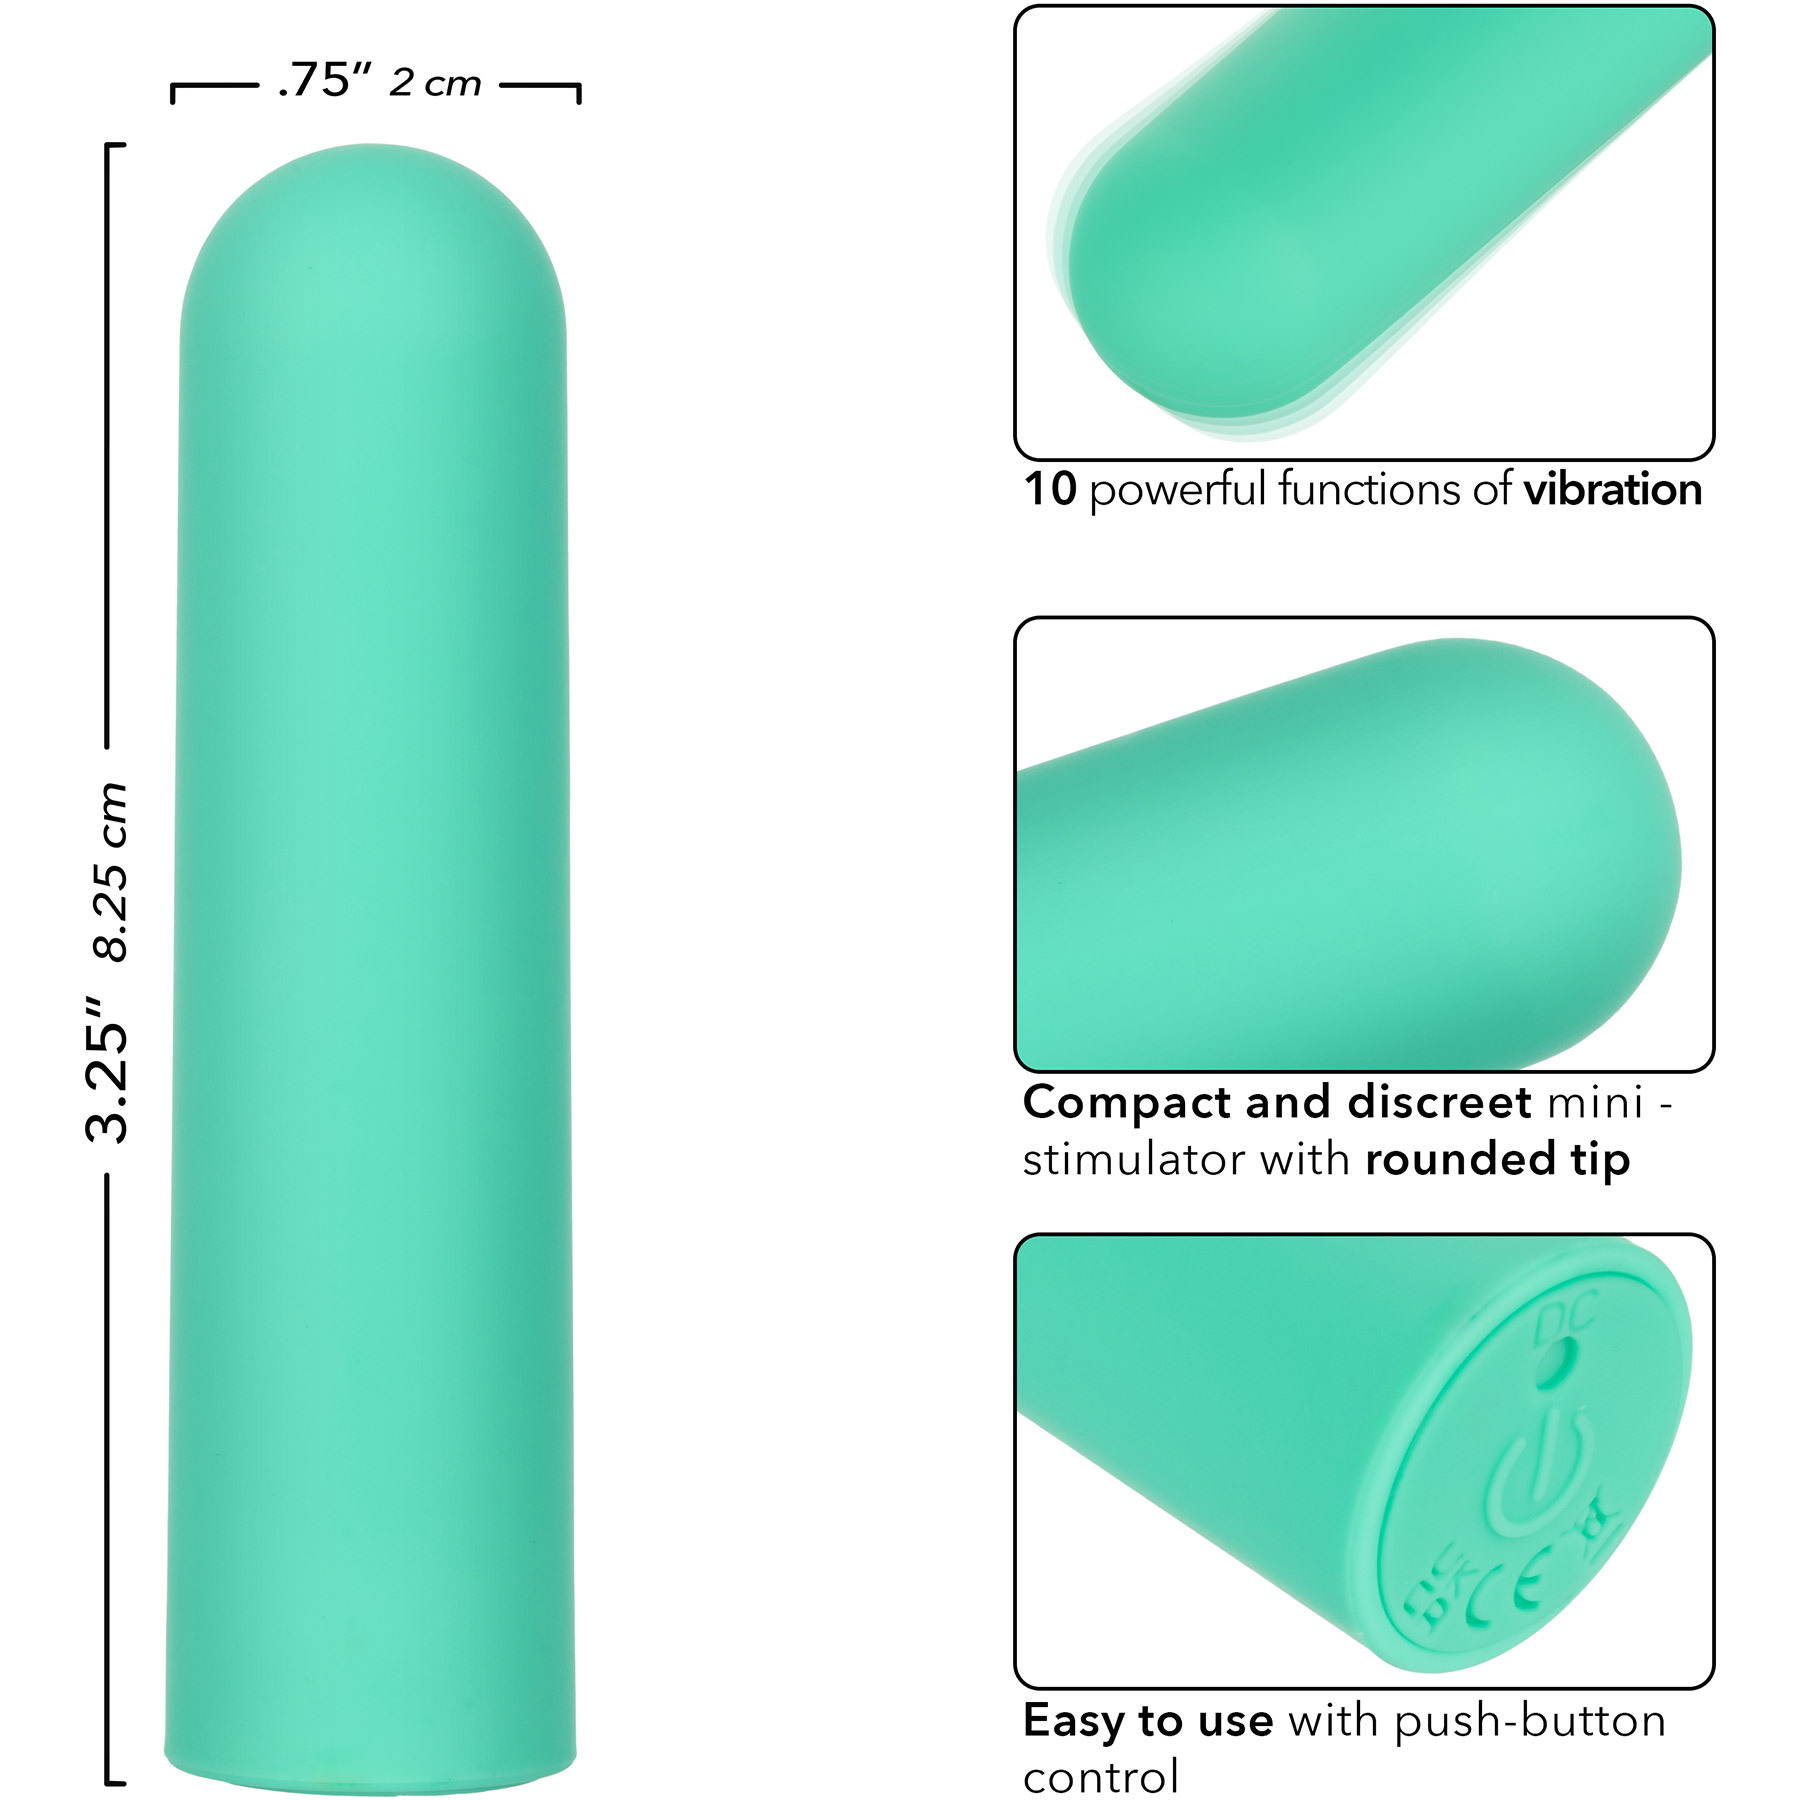 Turbo Buzz Rounded Bullet Rechargeable Waterproof Vibrator - Measurements